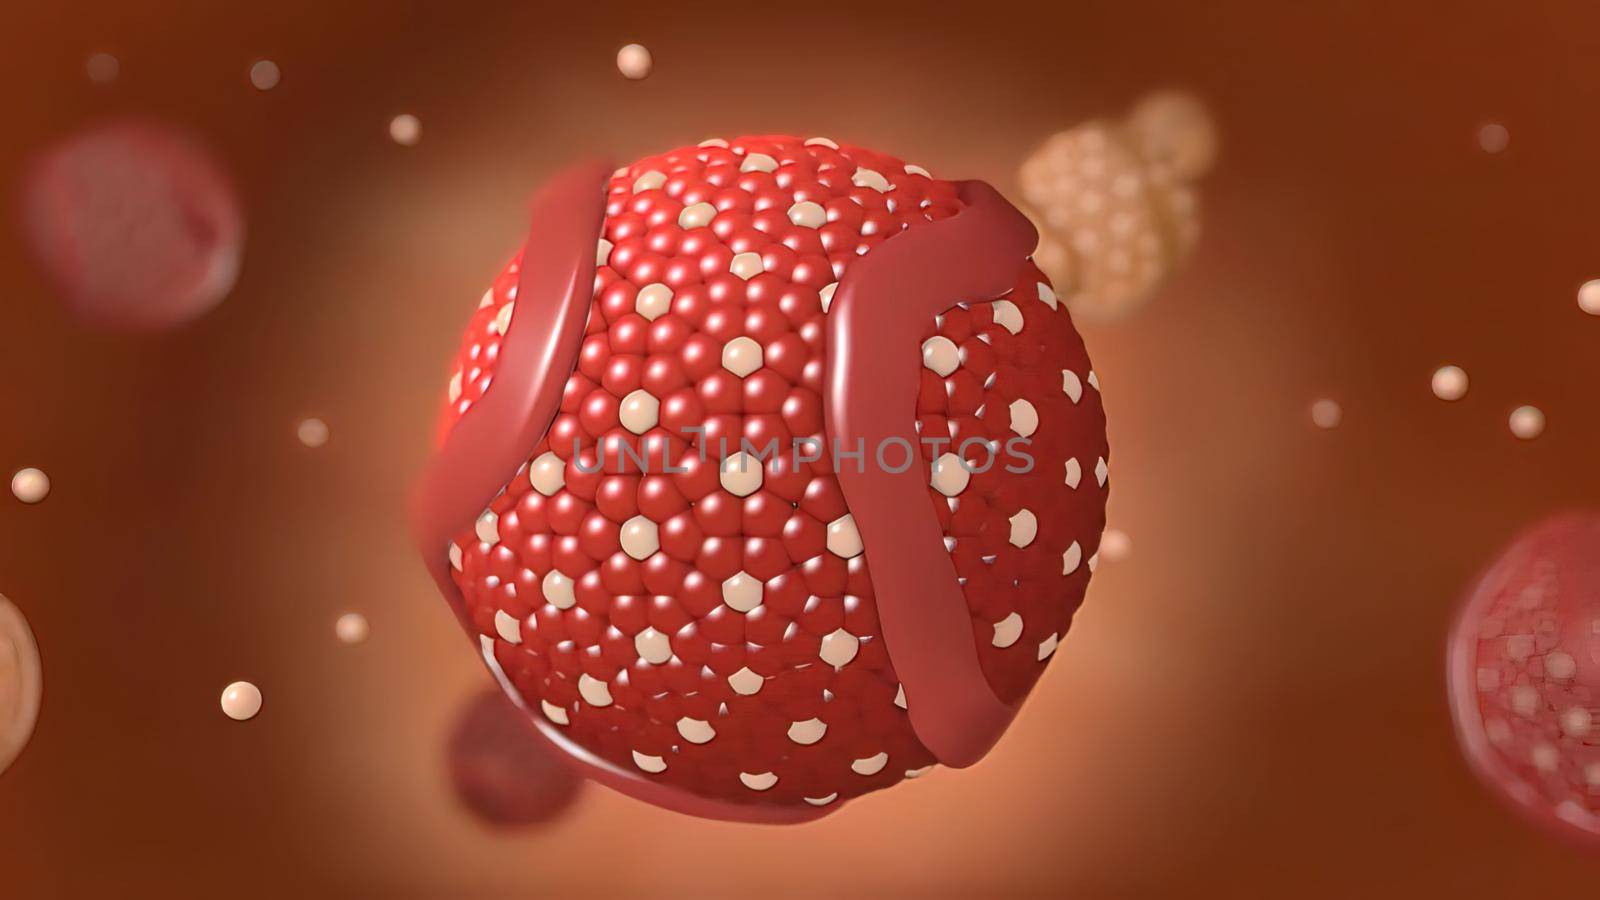 Atherosclerosis, Cholesterol And Other Substances In And On The Artery Walls. 3D illustration